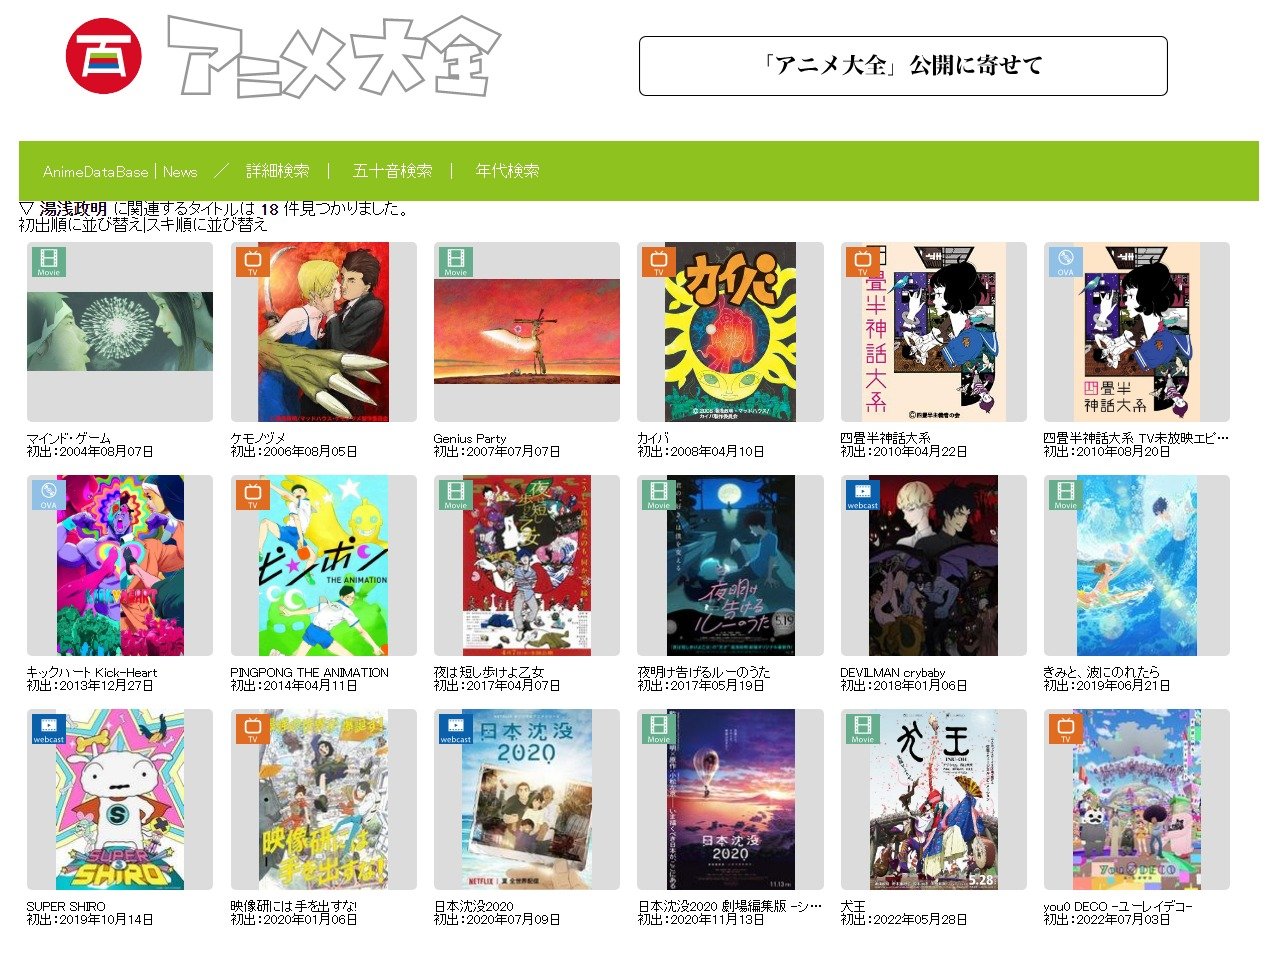 World's Largest Anime Information Database Now Open to the Public